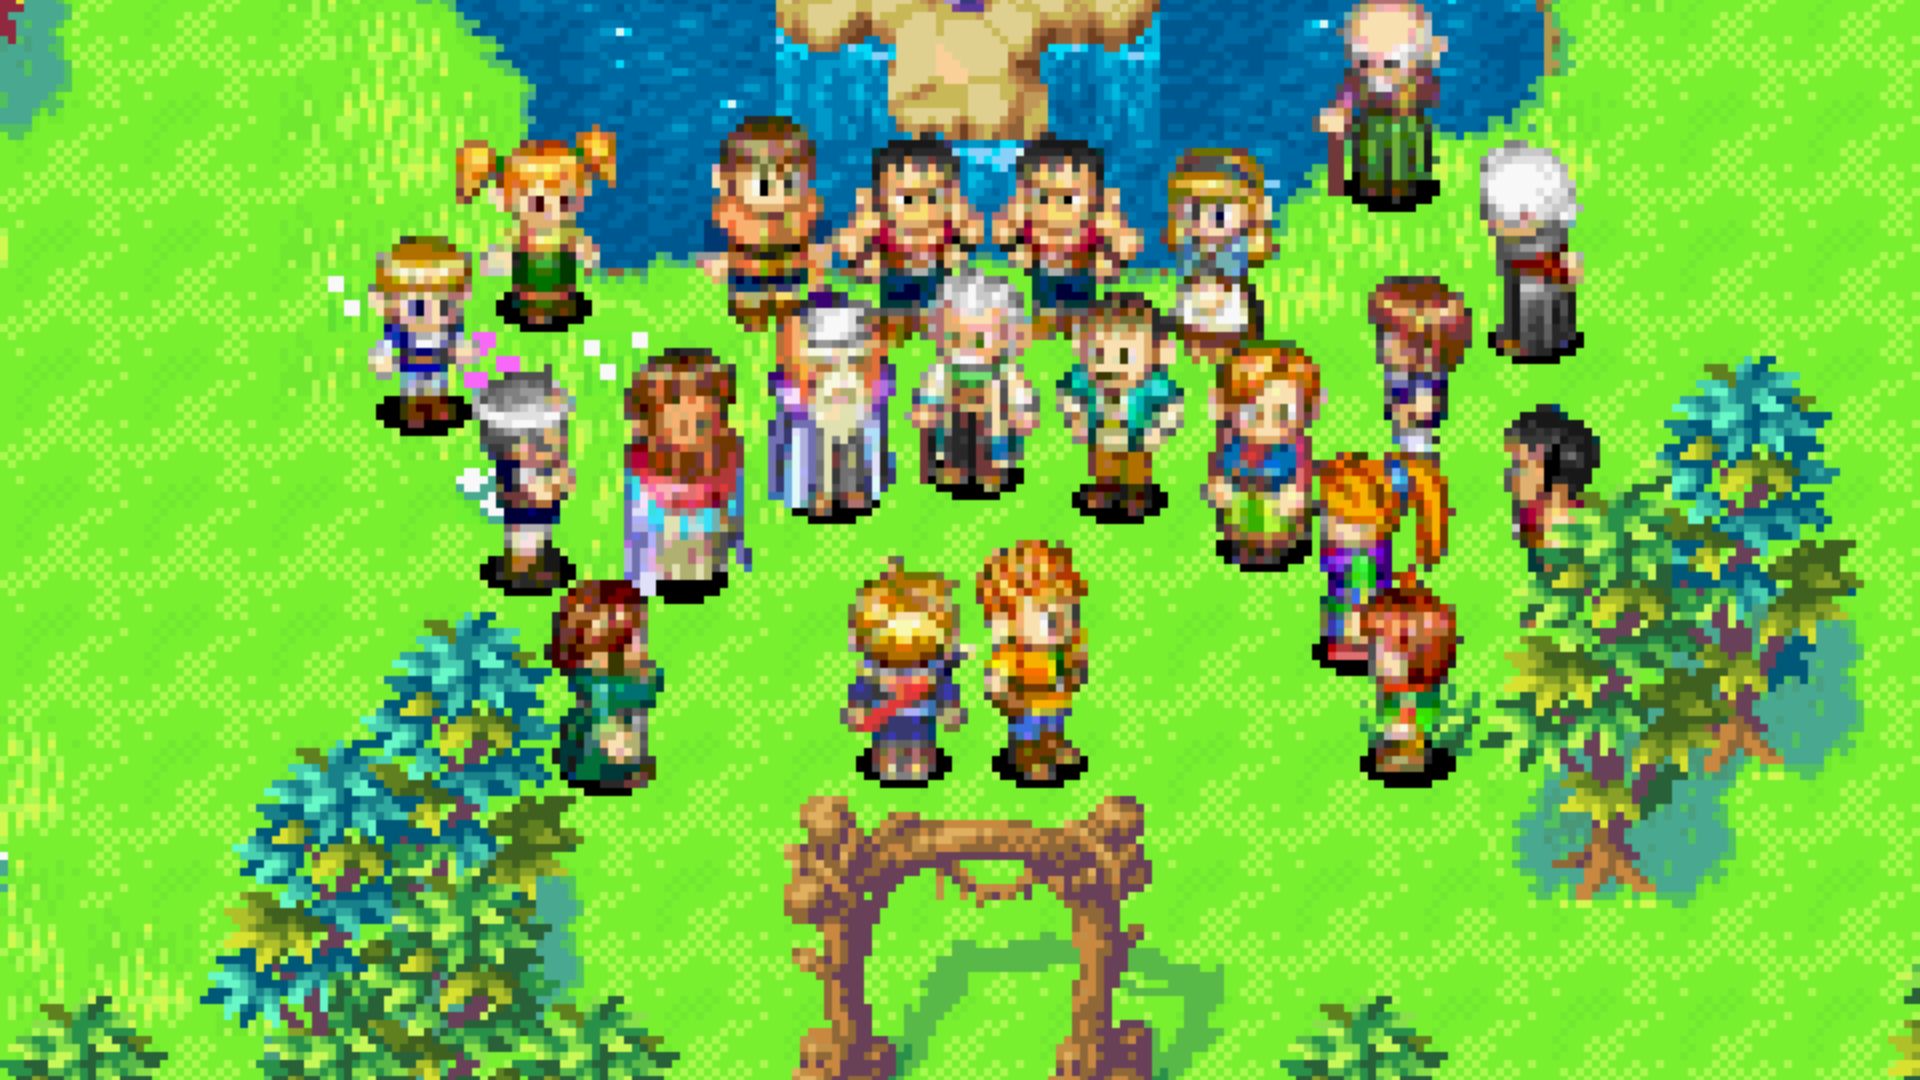 Golden Sun 1 & 2 is one of the best games that deserves an HD remaster. 